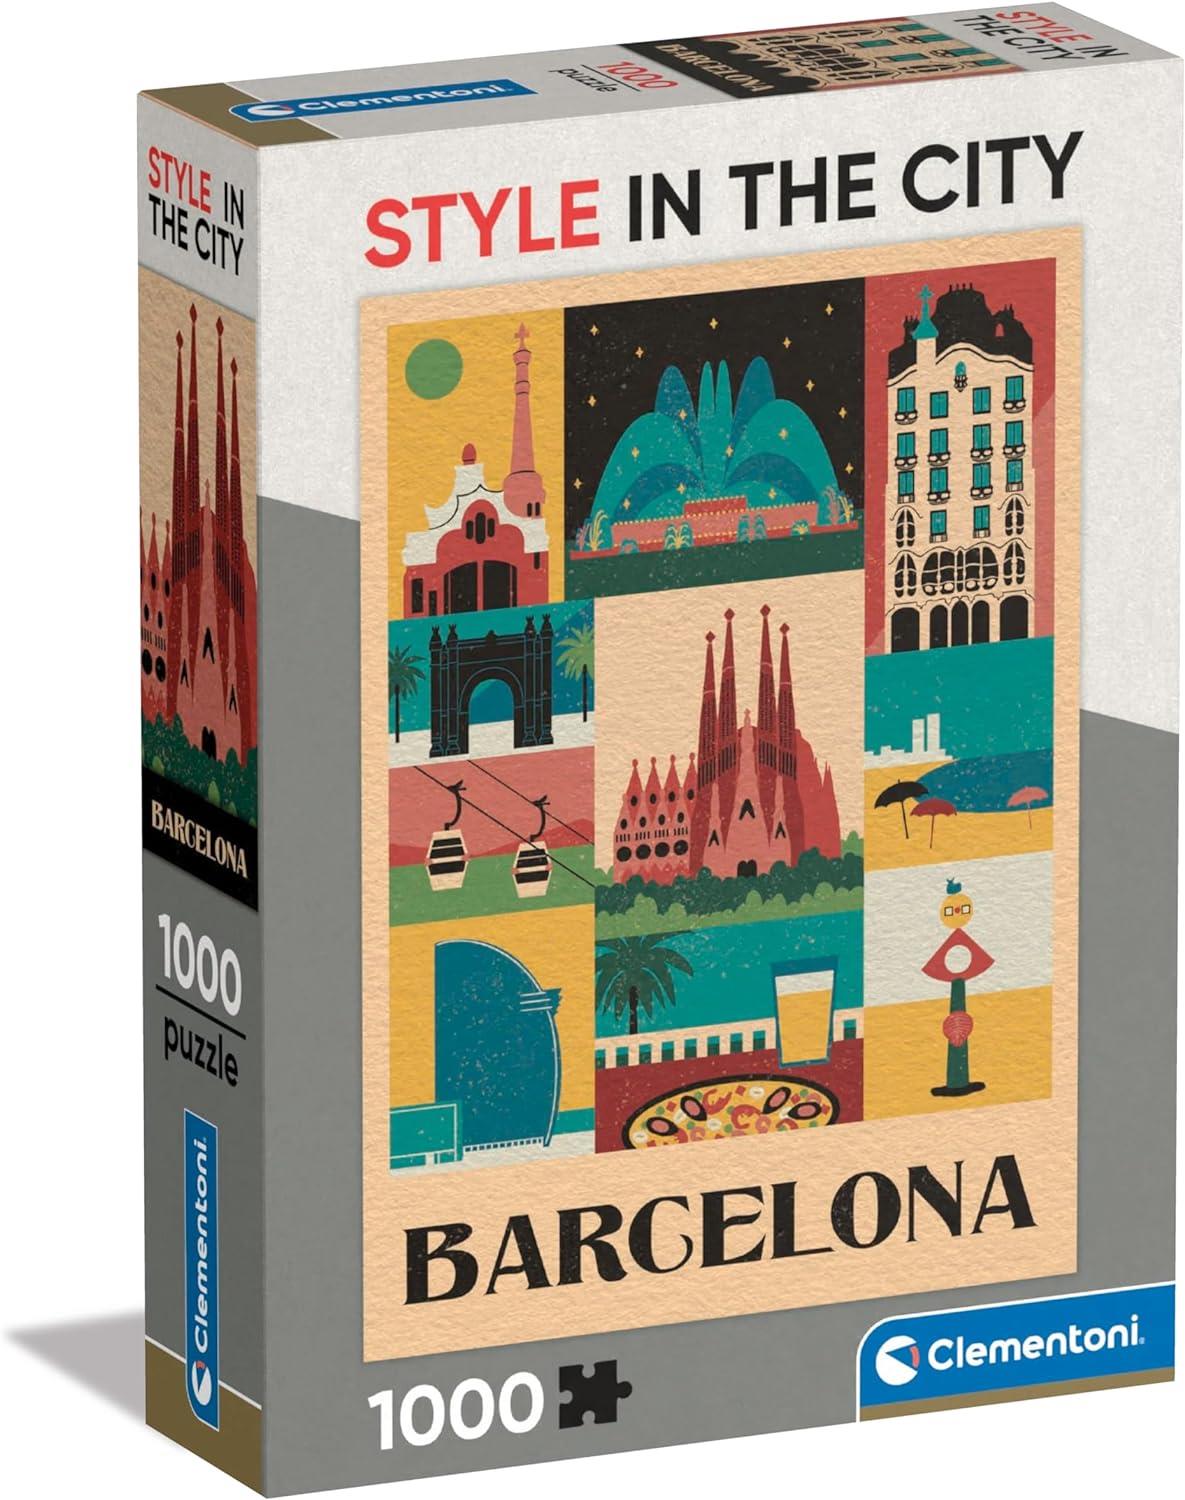 Clementoni Style In The City Barcelona Jigsaw Puzzle (1000 Pieces)